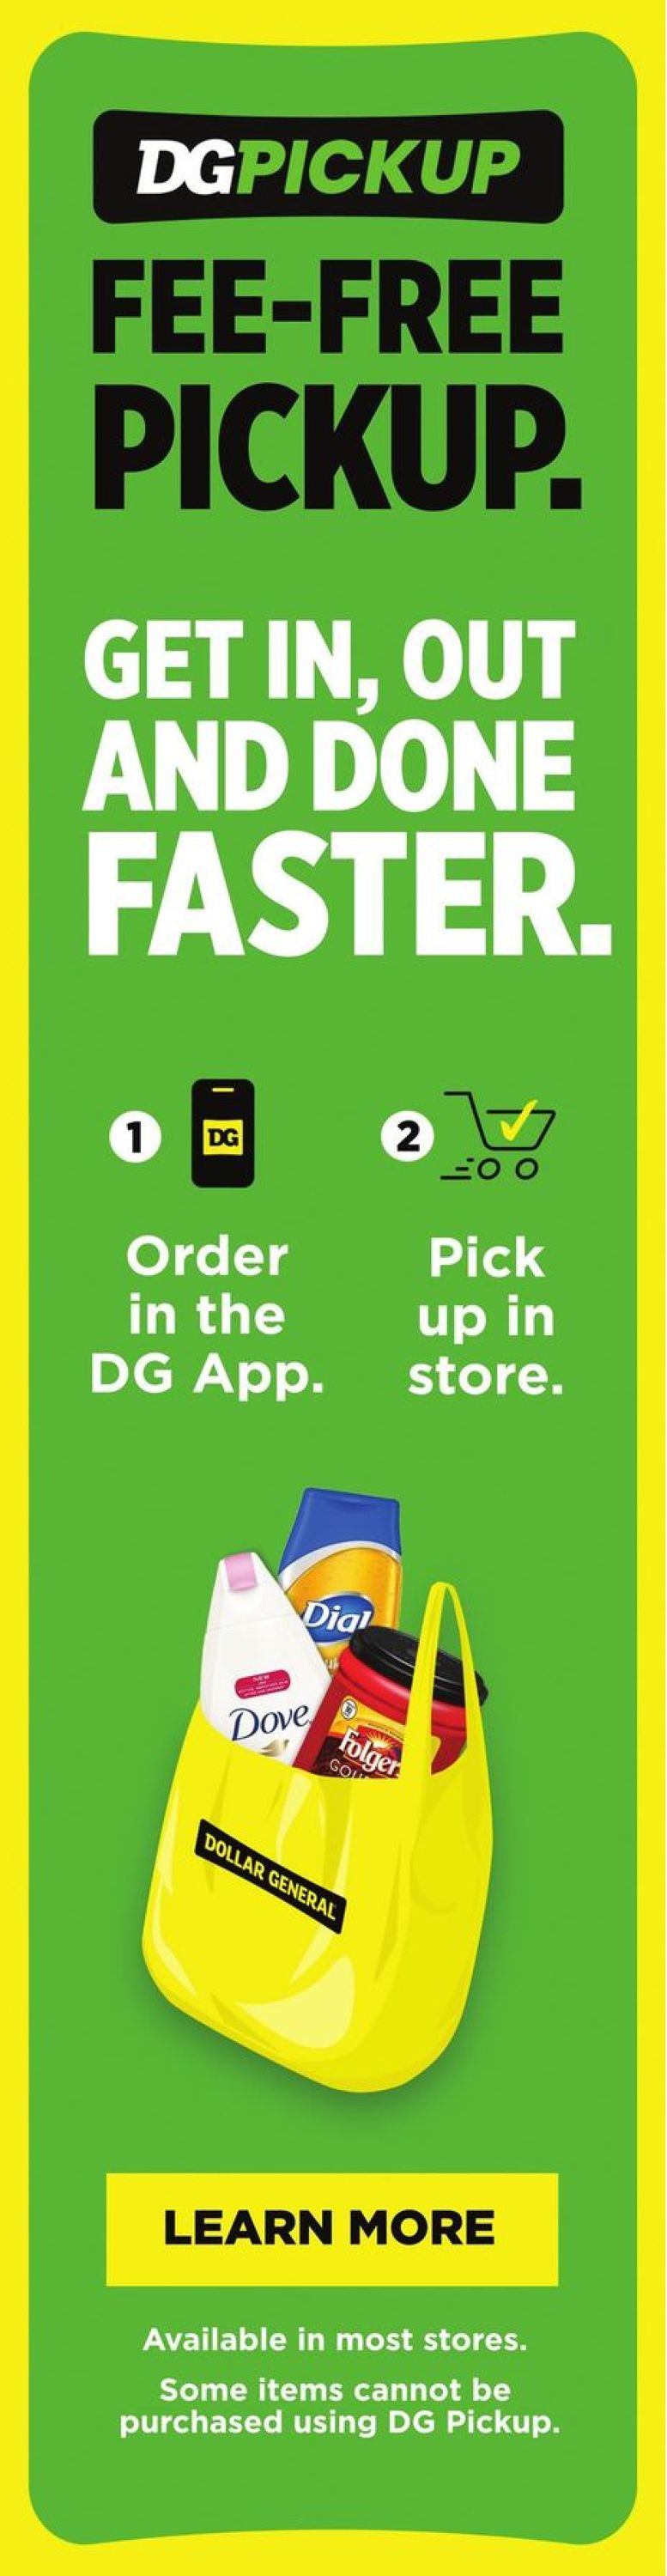 Dollar General Ad from 10/25/2020